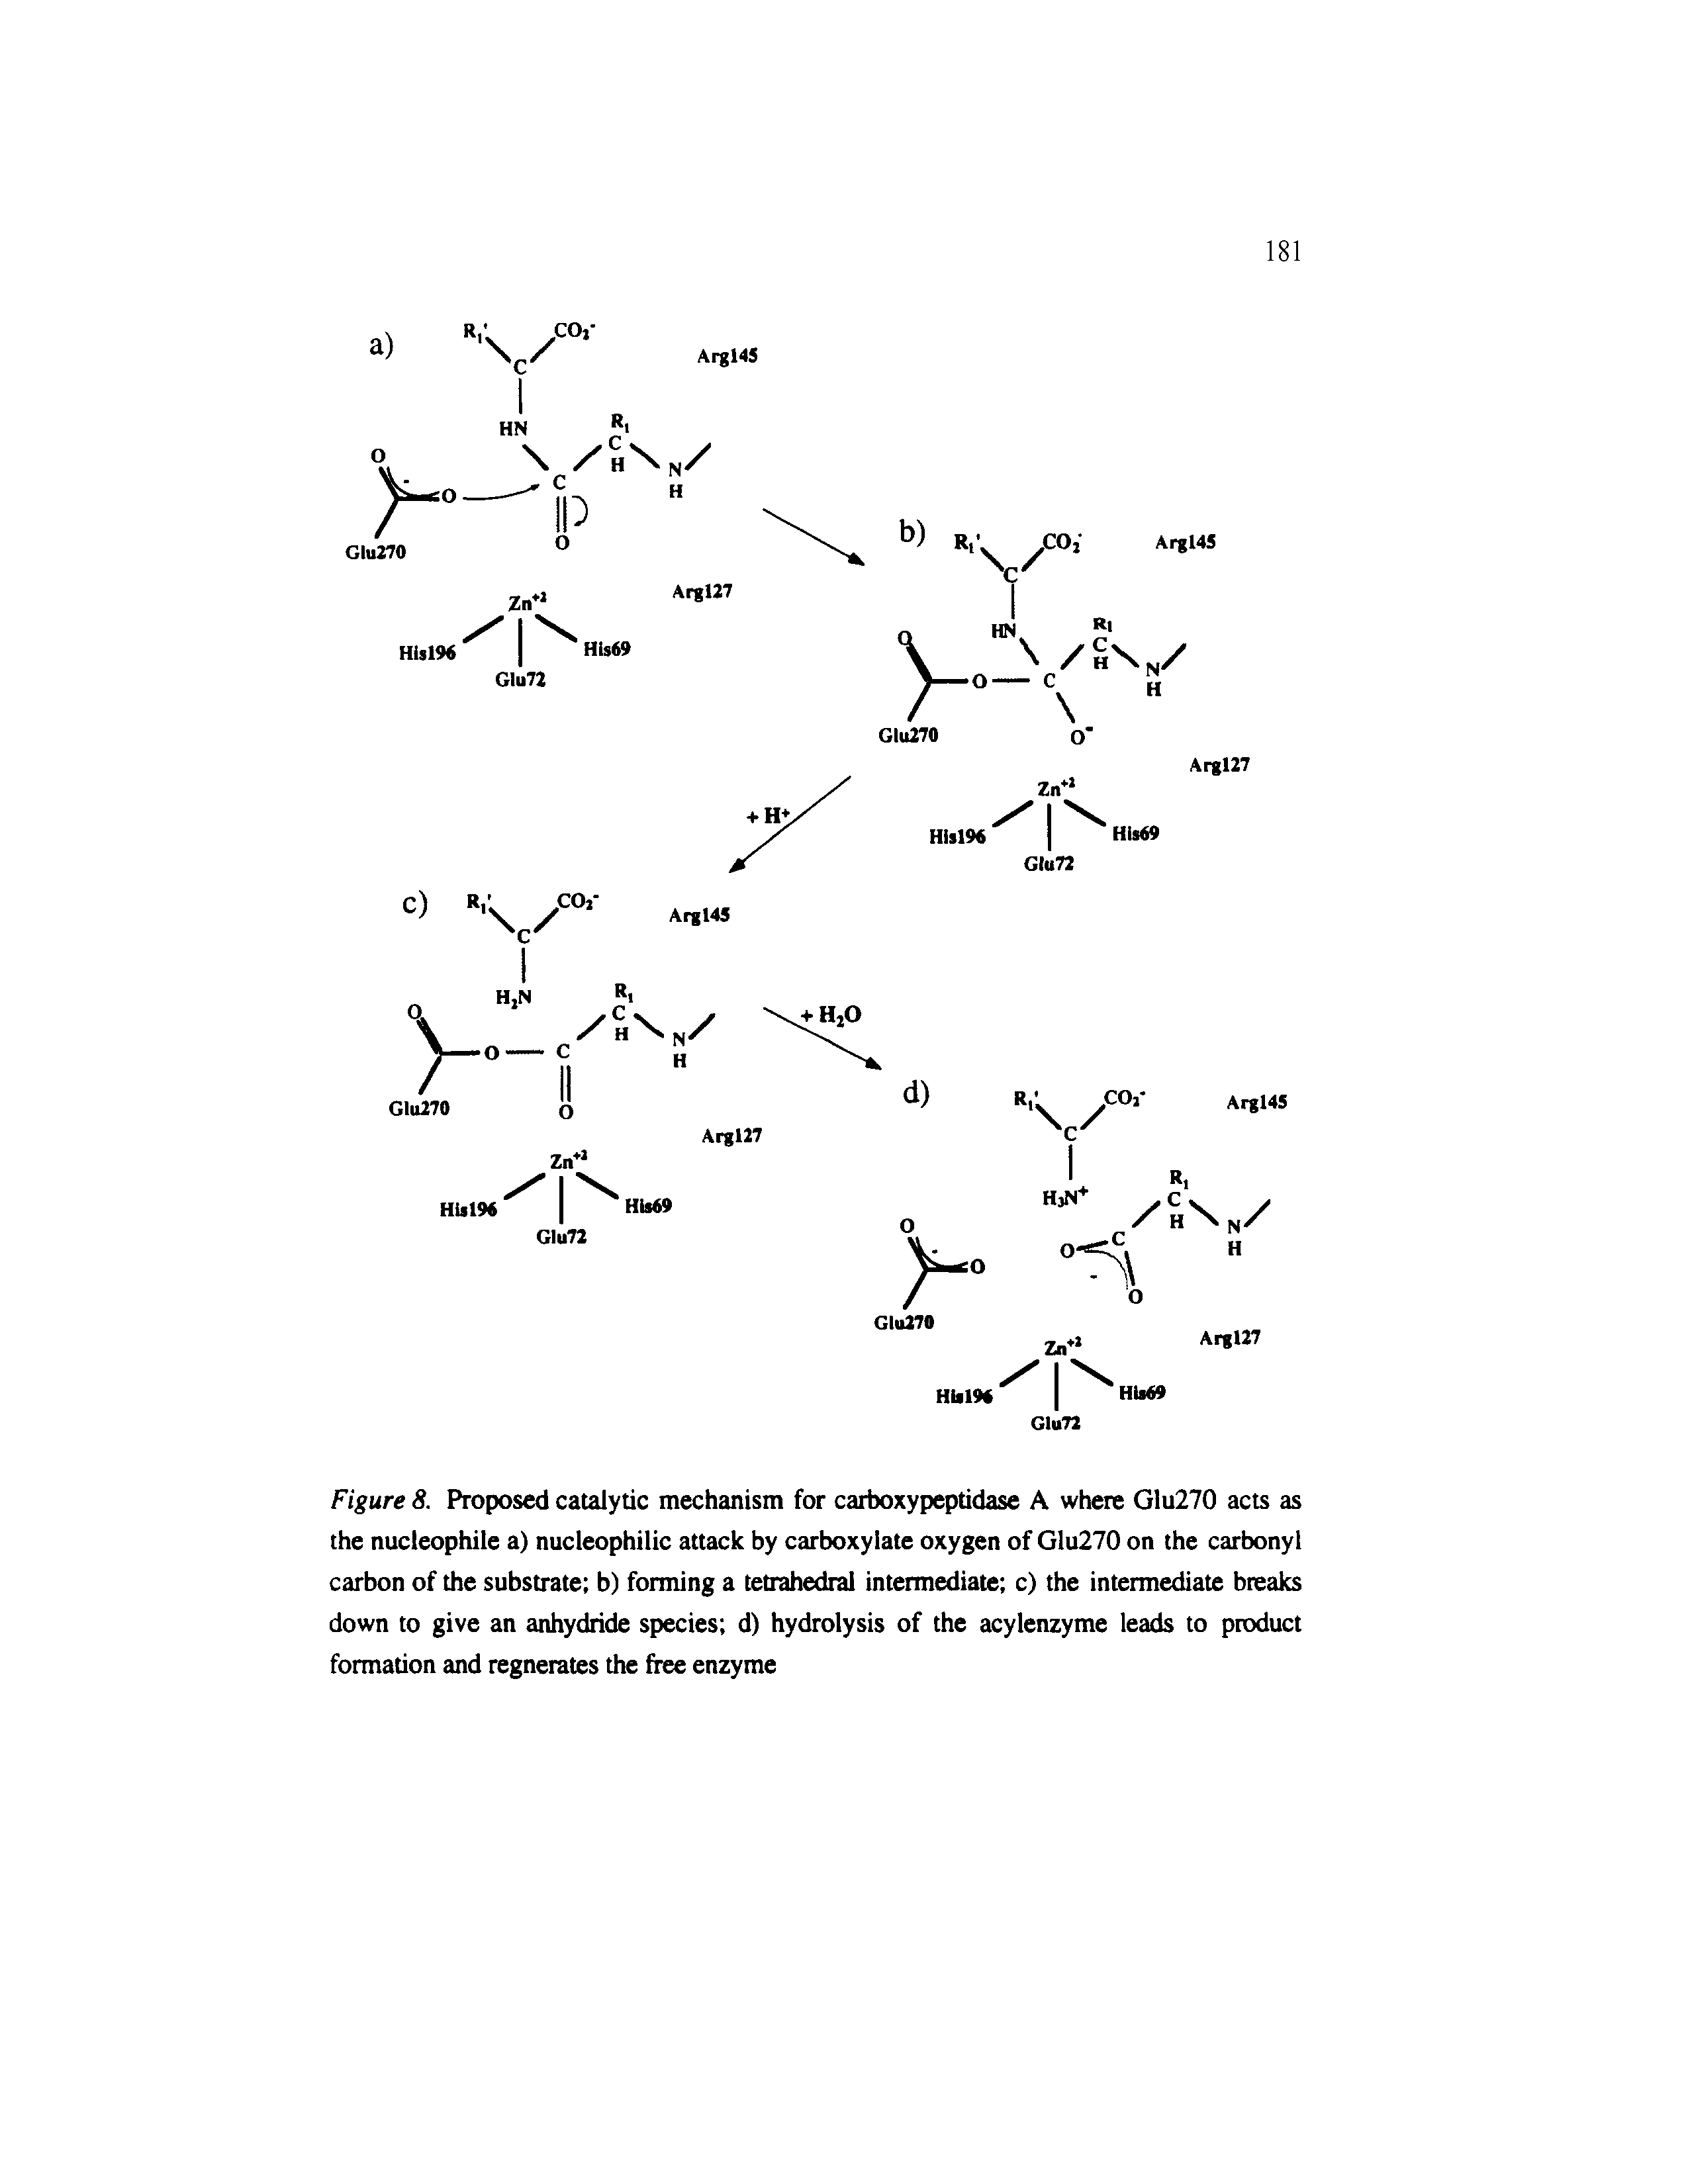 Figure 8. Proposed catalytic mechanism for carboxypeptidase A where Glu270 acts as the nucleophile a) nucleophilic attack by carboxylate oxygen of Glu270 on the carbonyl carbon of the substrate b) forming a tetrahedral intermediate c) the intermediate breaks down to give an anhydride species d) hydrolysis of the acylenzyme leads to product formation and regnerates the free enzyme...